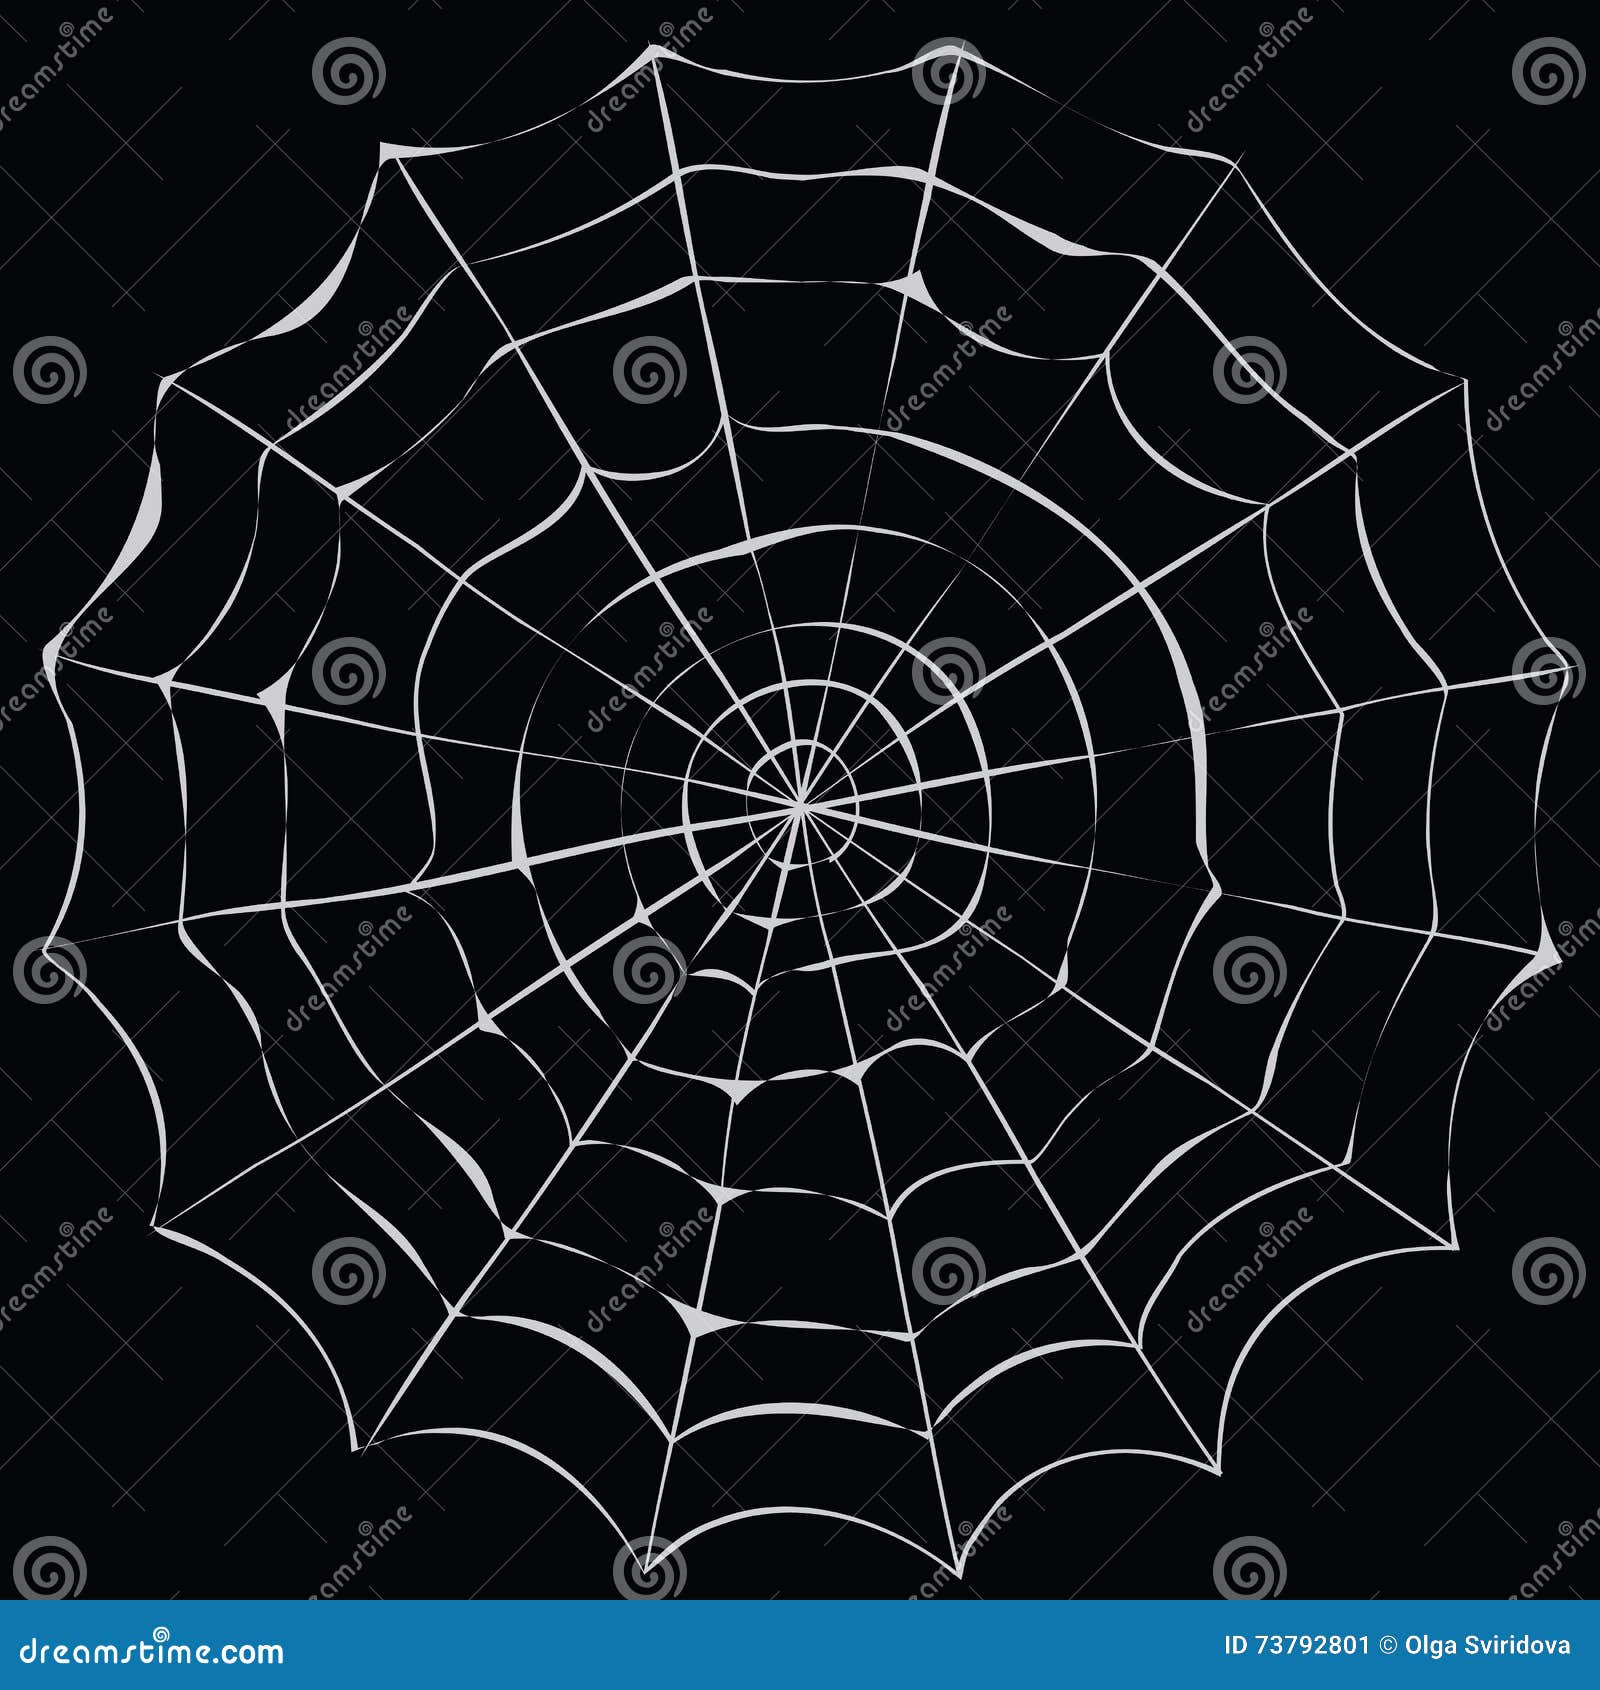 Simple cartoon spider web stock vector. Illustration of scary - 73792801